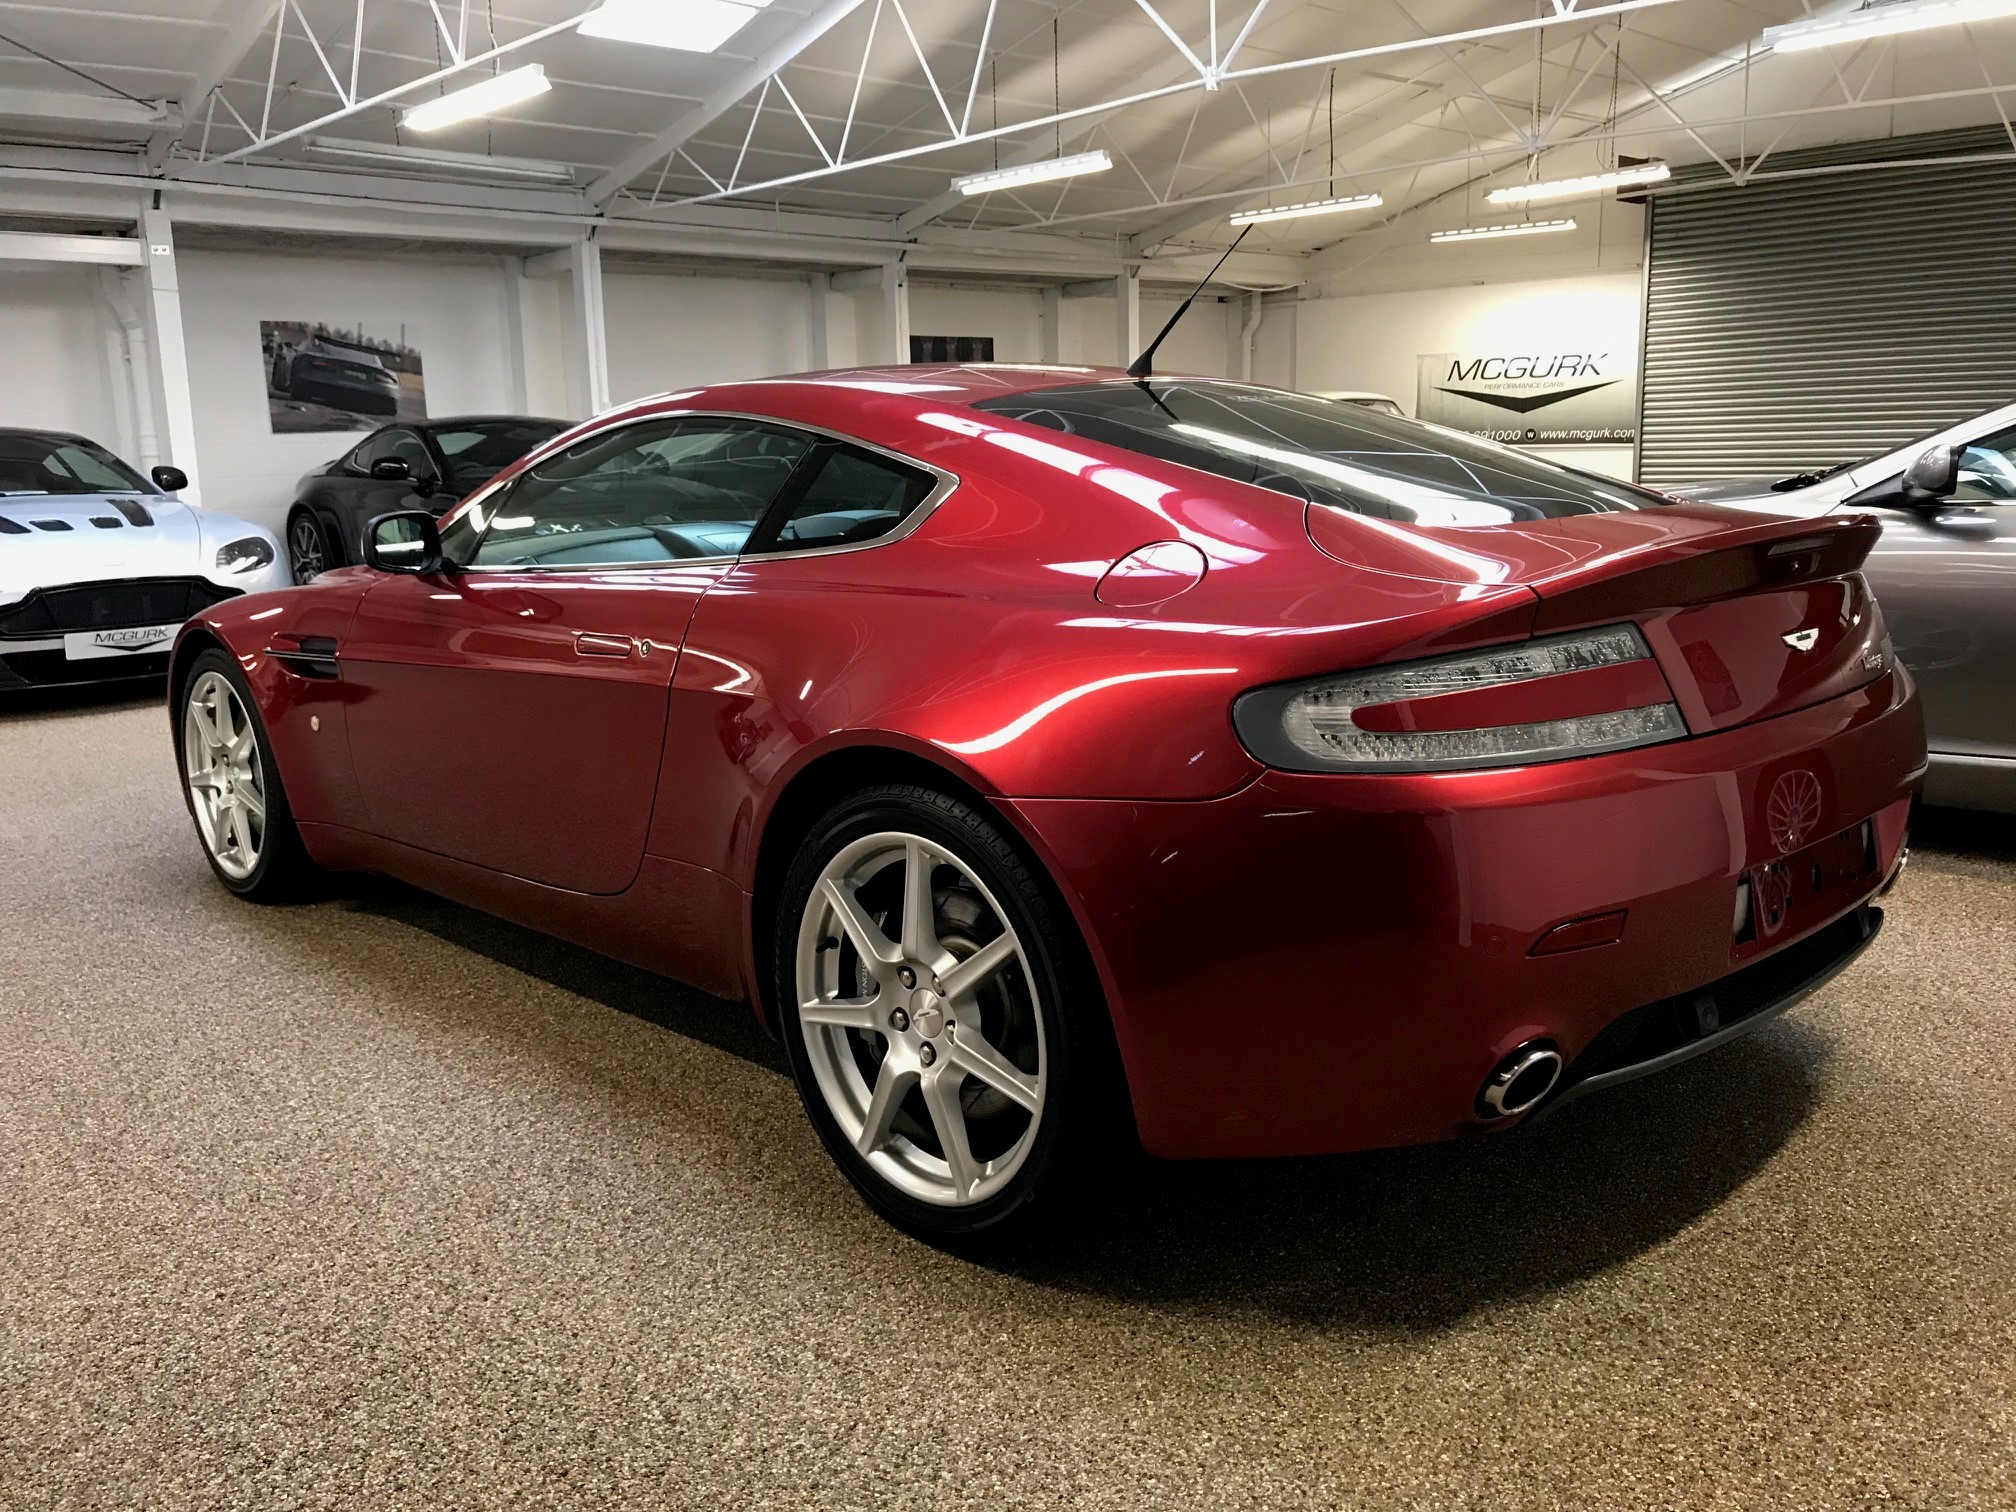 Experience Luxury And Power With The 2006 Aston Martin V8 Vantage